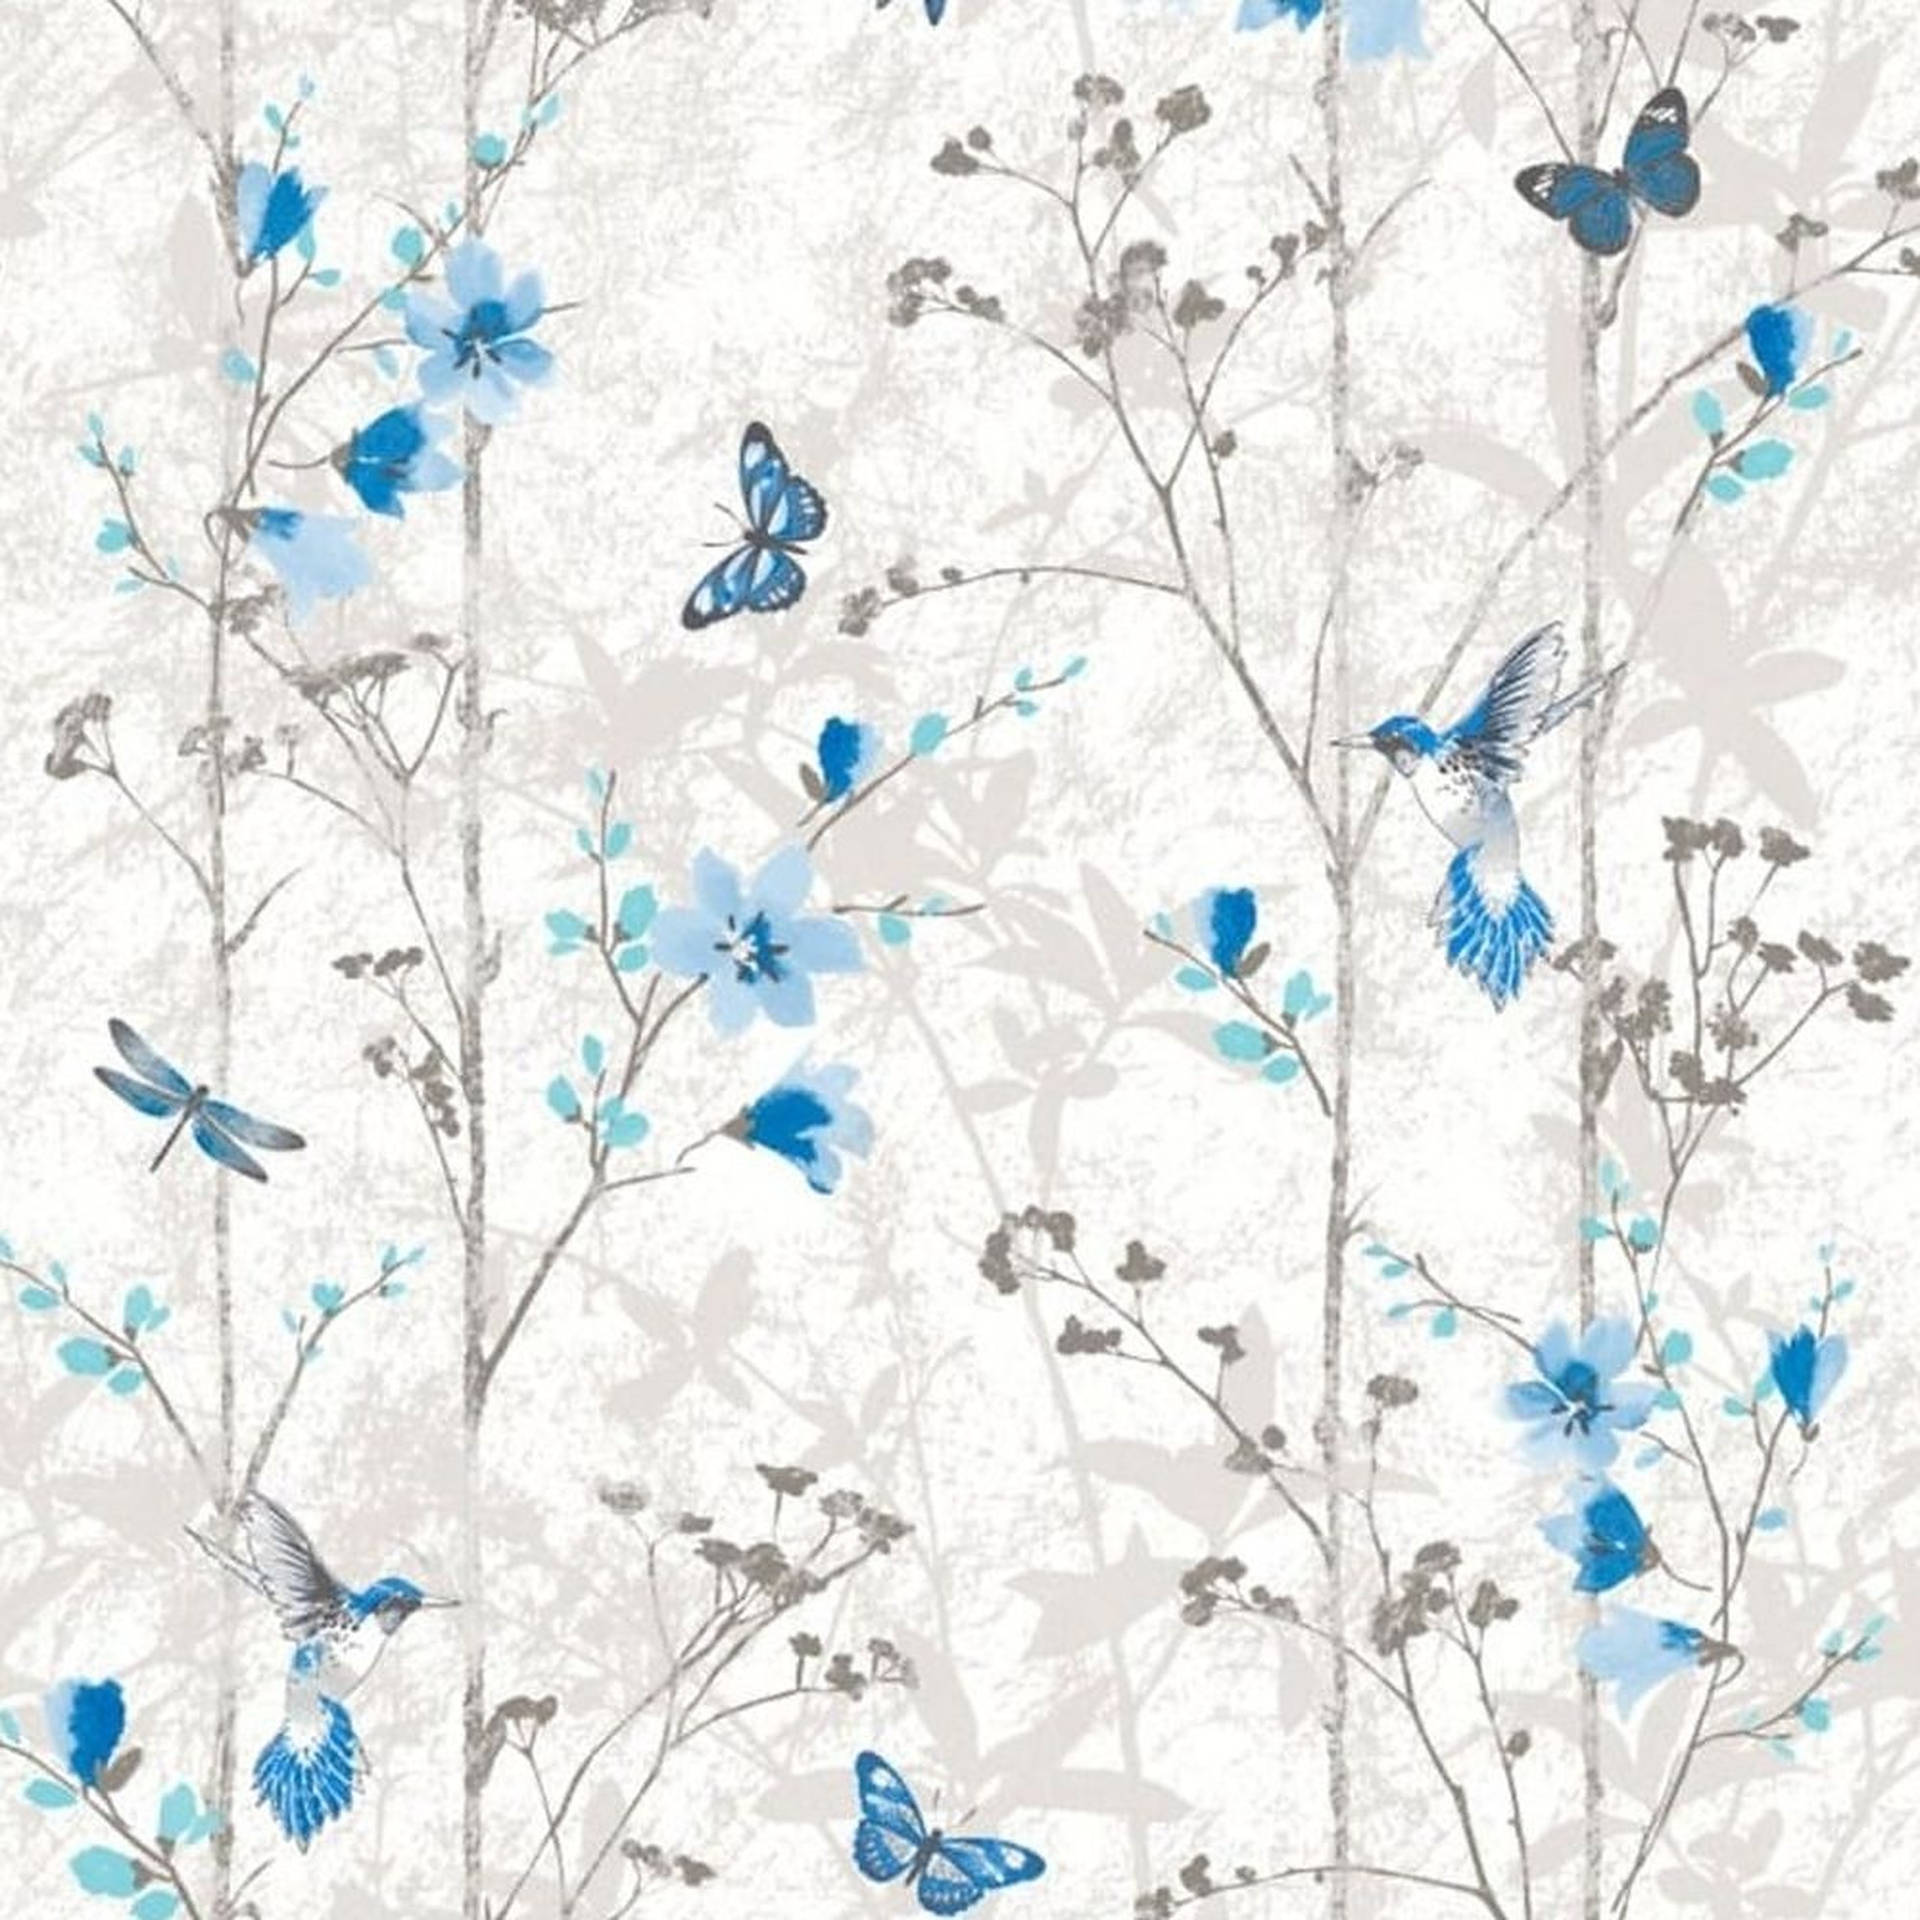 Aesthetic Flower With Blue Butterfly Background